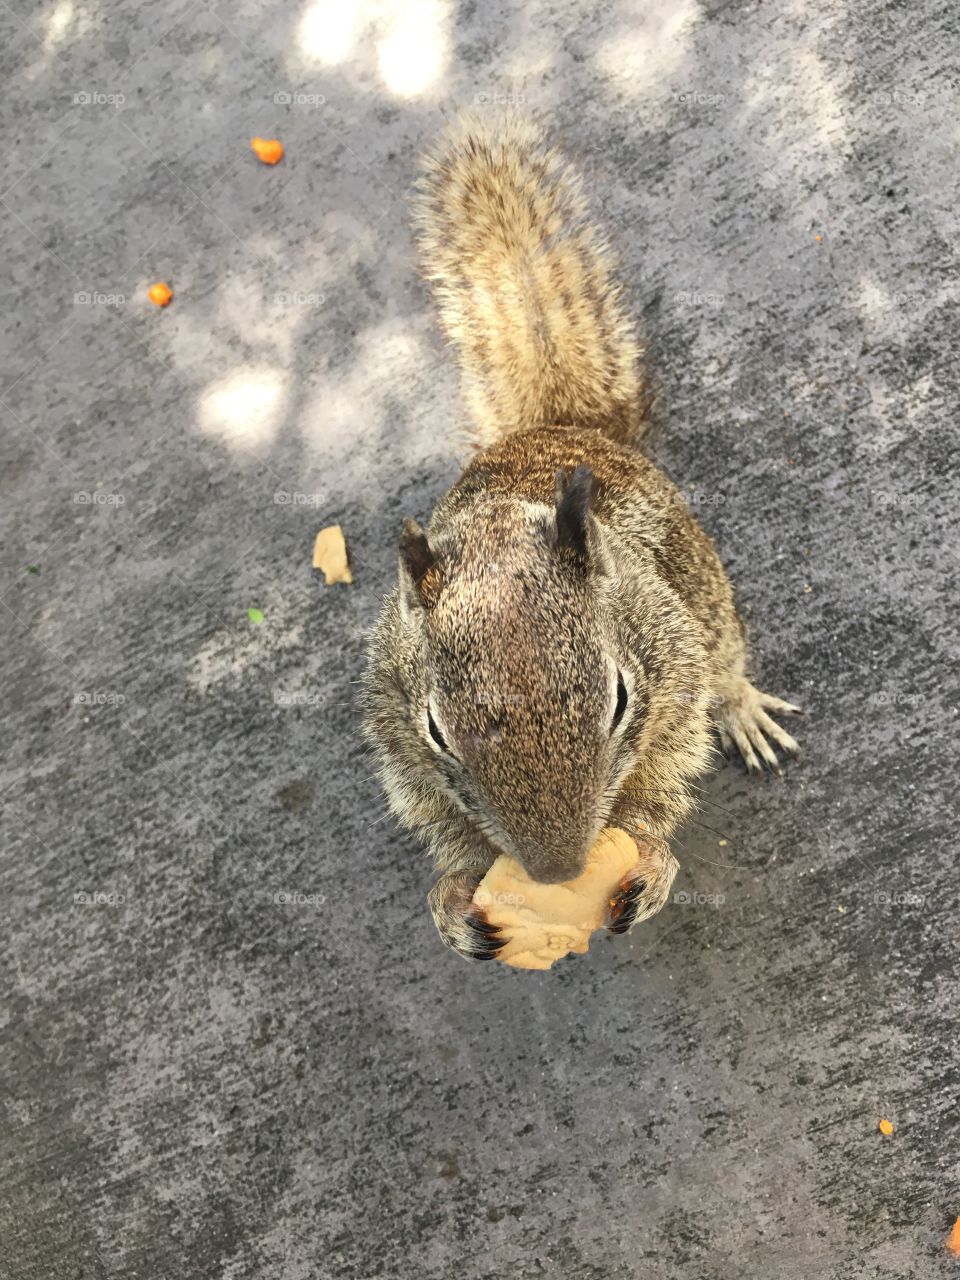 Hungry squirrel!